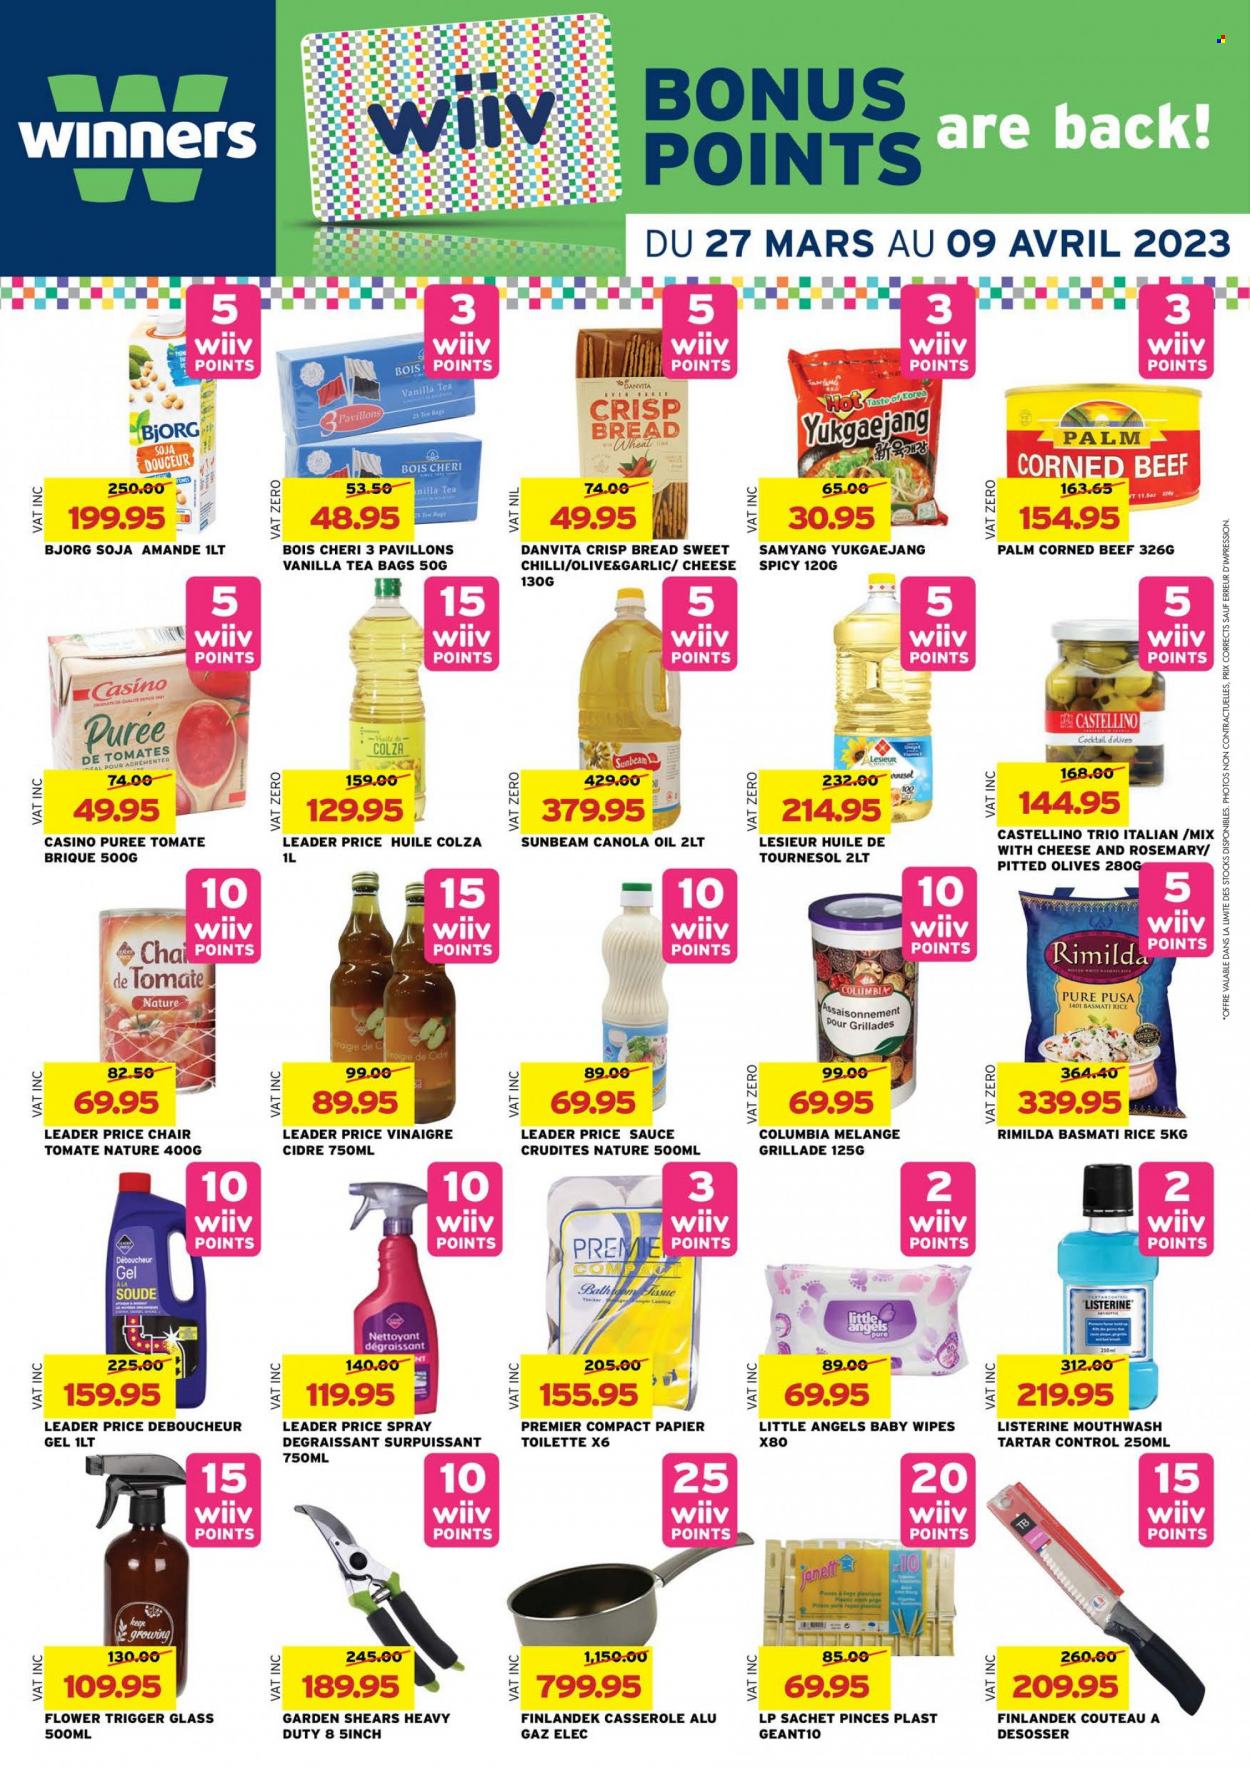 thumbnail - Winner's Catalogue - 27.03.2023 - 9.04.2023 - Sales products - bread, Ace, crispbread, garlic, sauce, corned beef, cheese, Mars, basmati rice, rice, rosemary, canola oil, oil, tea bags, beef meat, wipes, baby wipes, bath tissue, mouthwash, casserole, Sunbeam, Listerine, olives. Page 21.